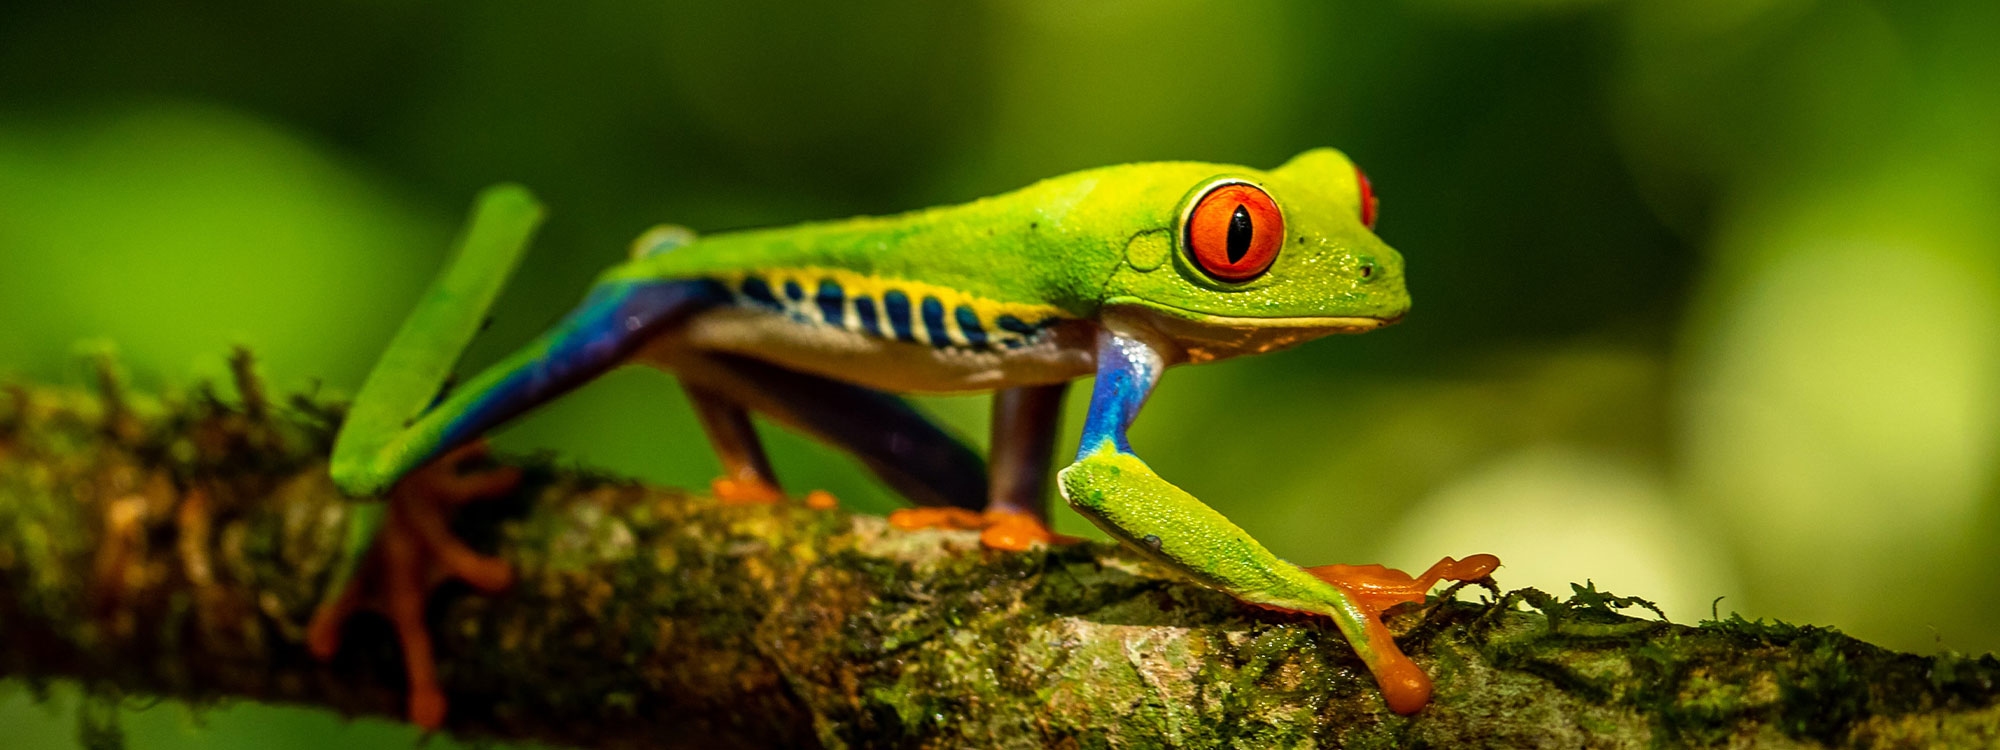 Green frog on tree branch